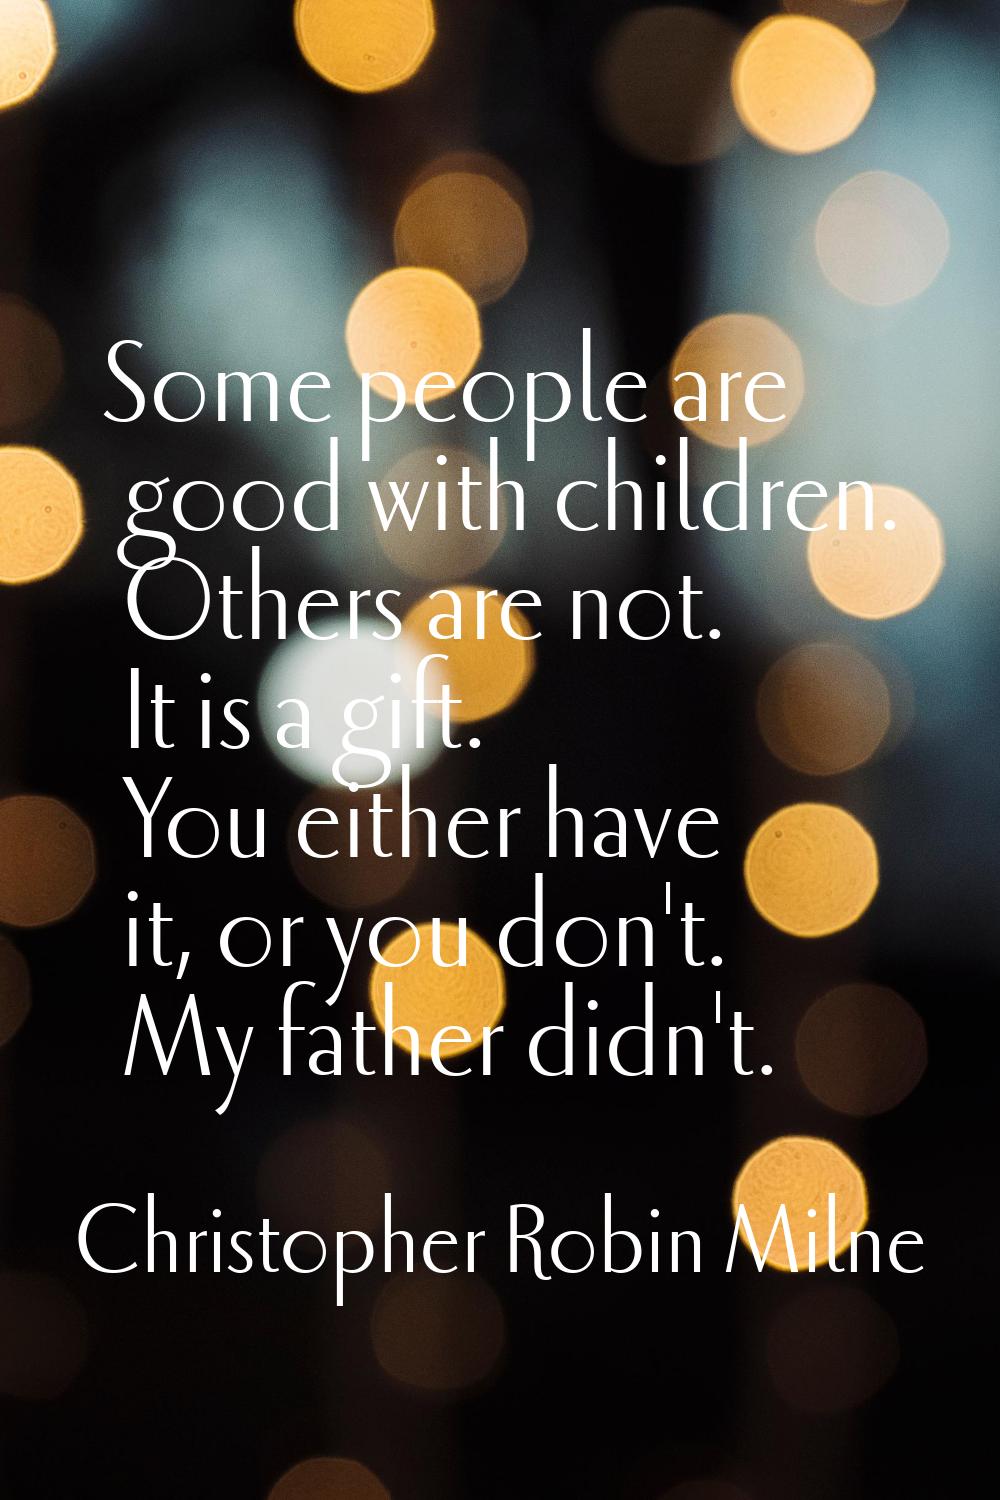 Some people are good with children. Others are not. It is a gift. You either have it, or you don't.